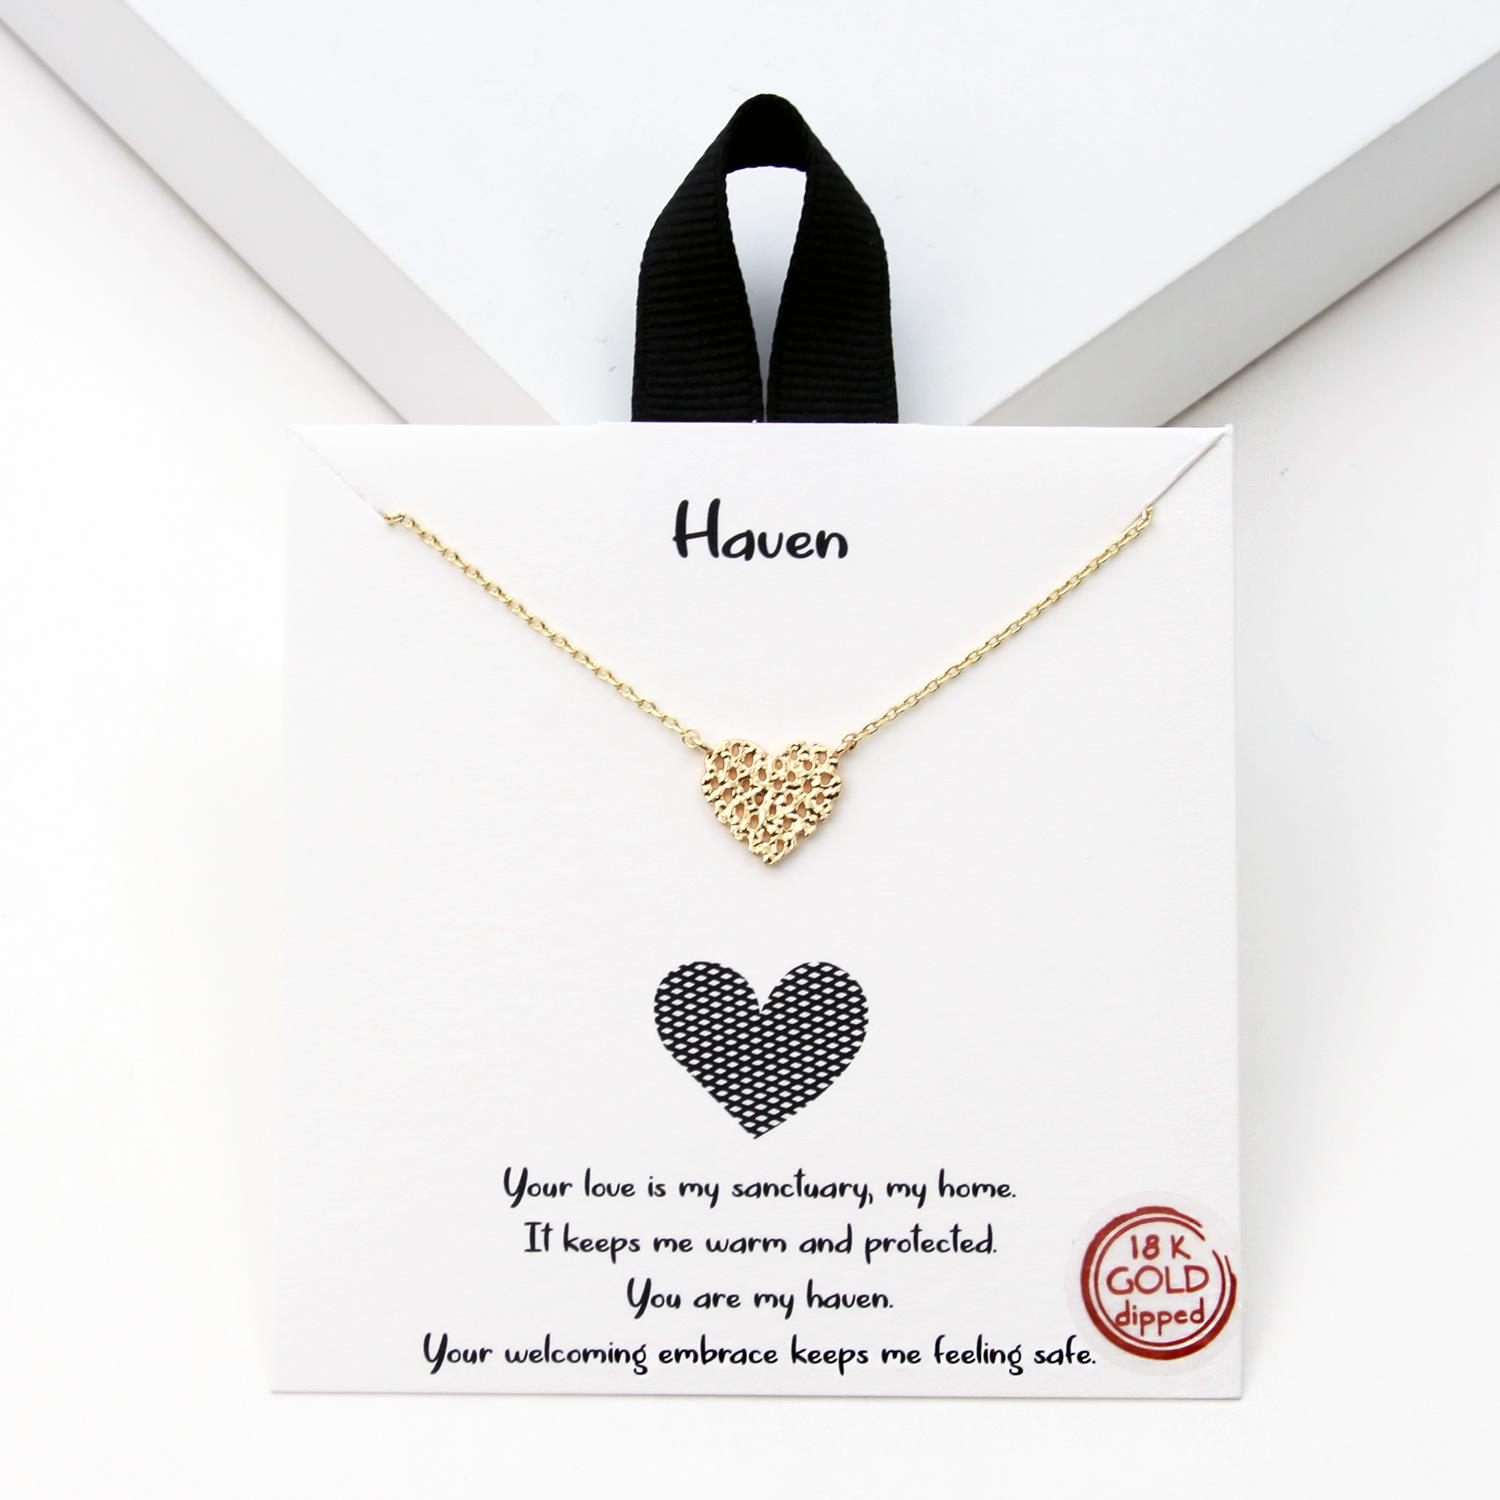 18K GOLD RHODIUM DIPPED HAVEN NECKLACE